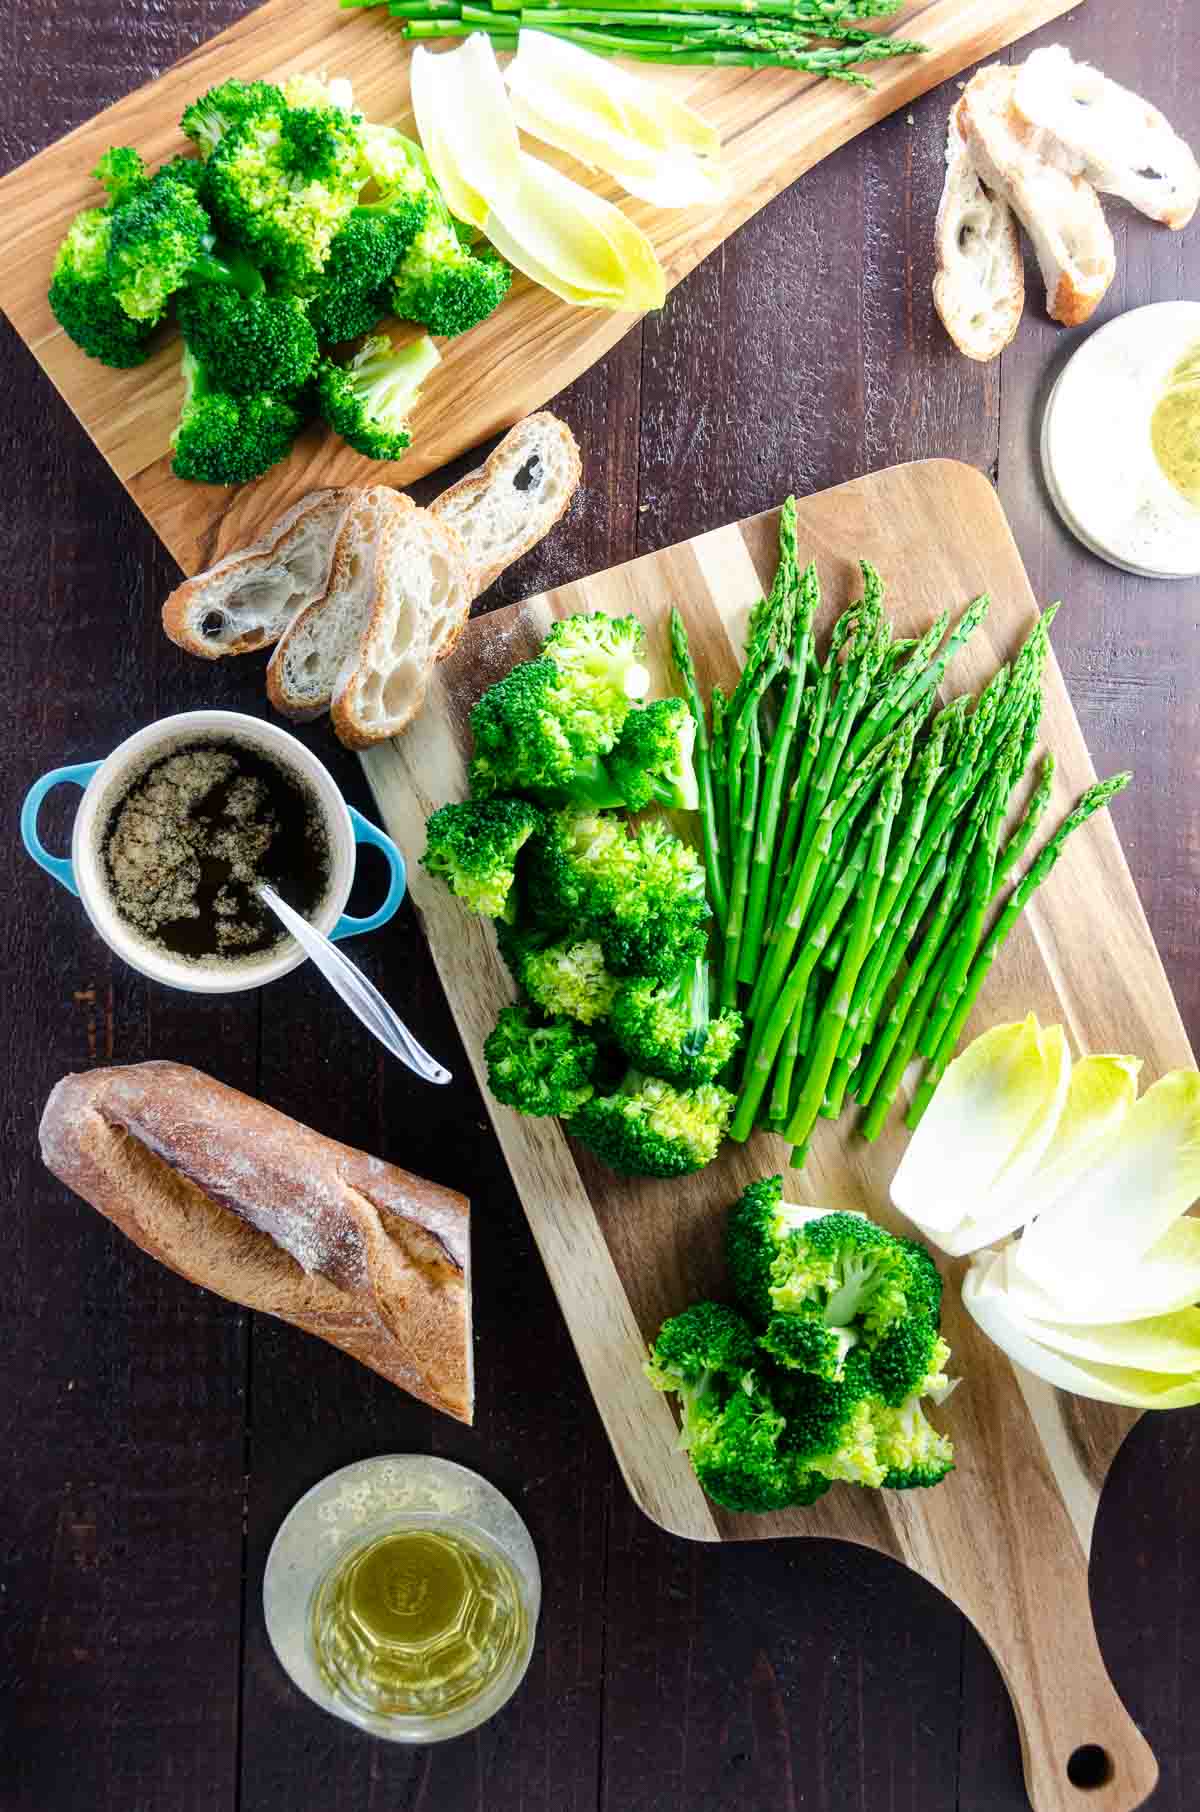 bagna cauda Piedmontese with broccoli, asparagus, baguette, endive, and white wine